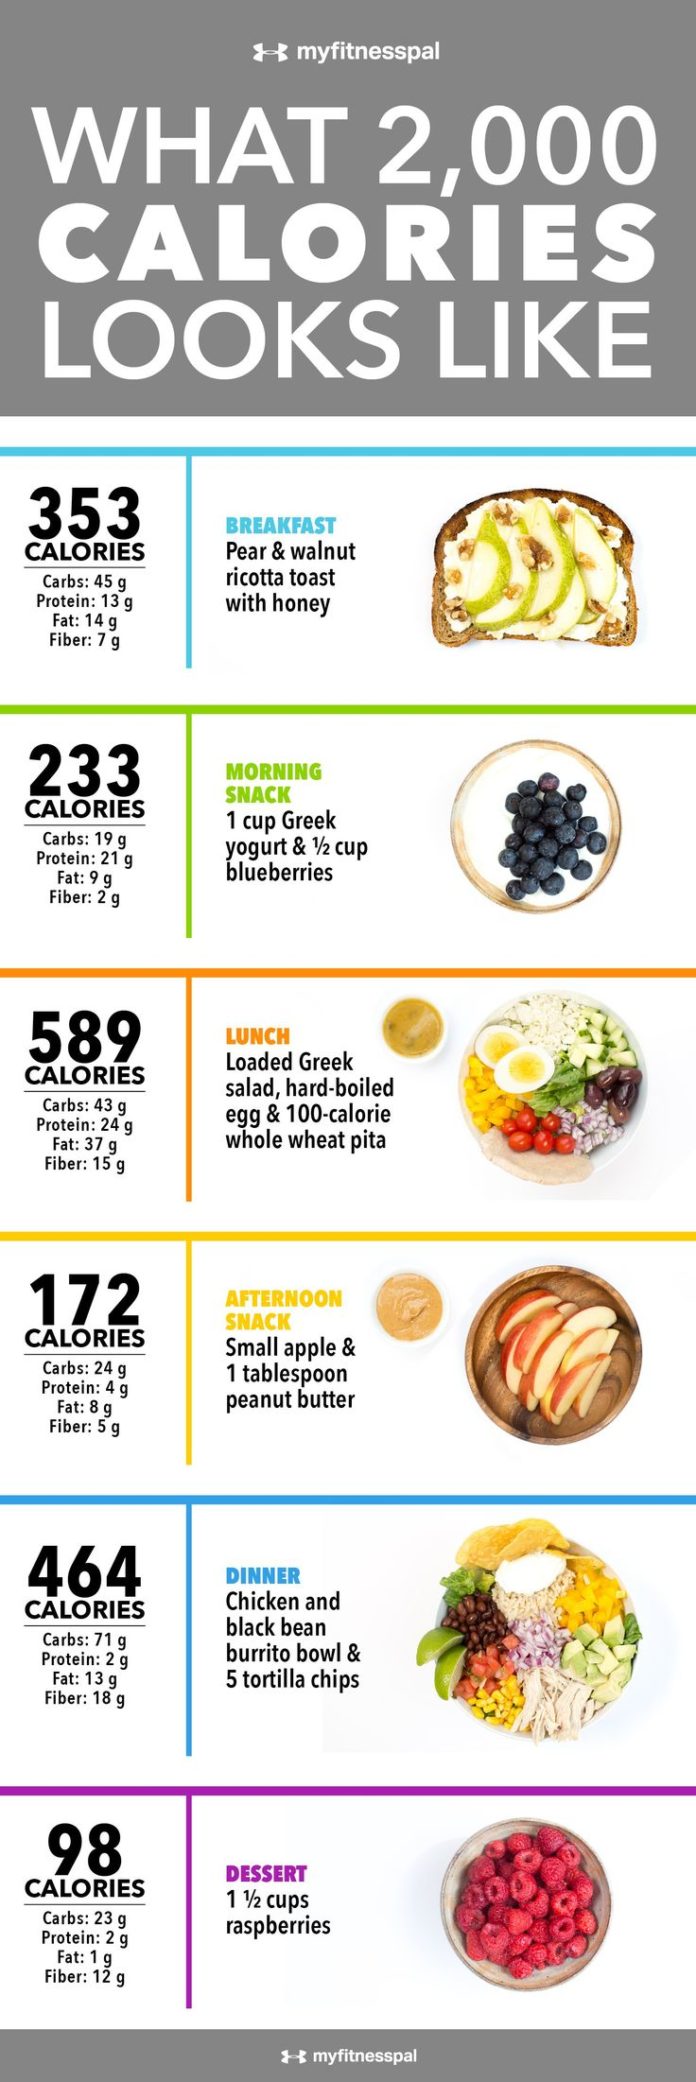 Food infographic - What 2,000 Calories Looks Like [Infographic ...